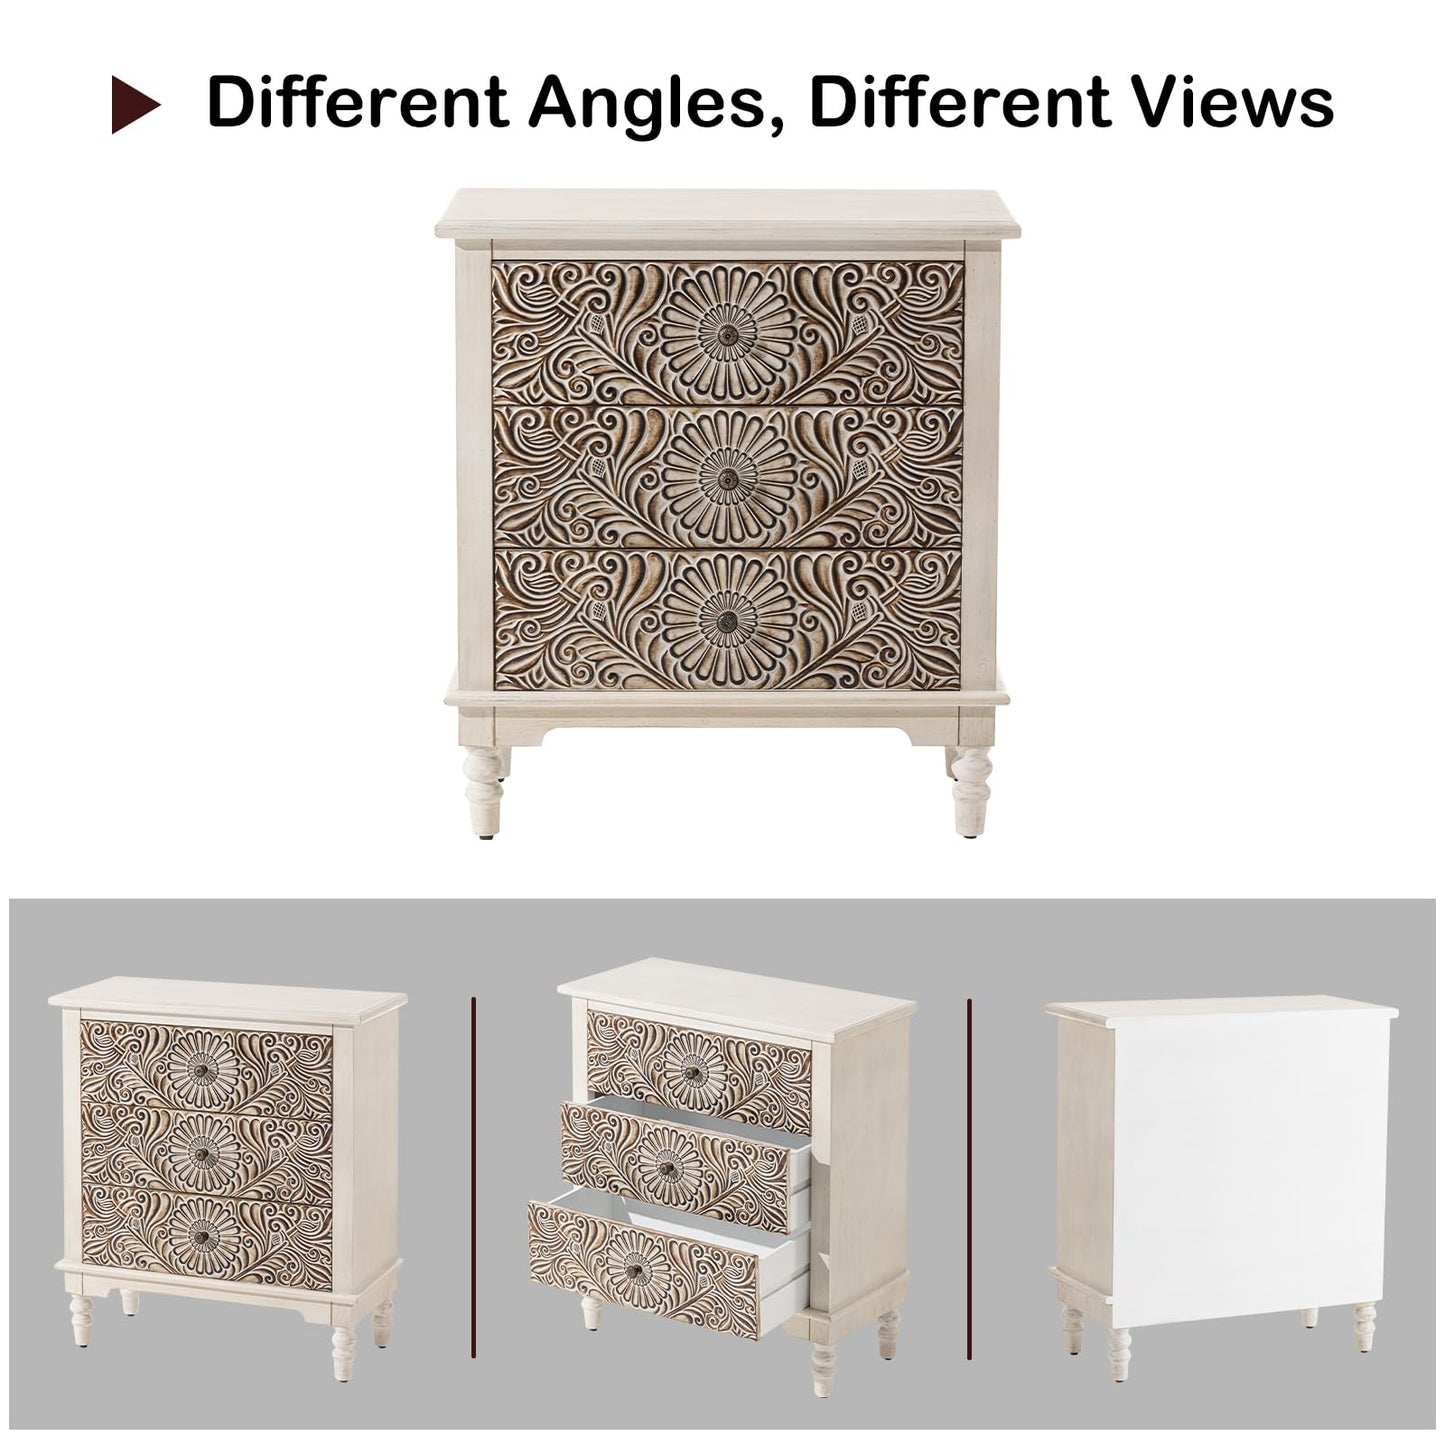 HOMPUS End Table w Flower Pattern, Nightstand w 3 Storage Drawers, Small Night Stand w Wood Grain Finish, Accent Table Side Table, Small Chest